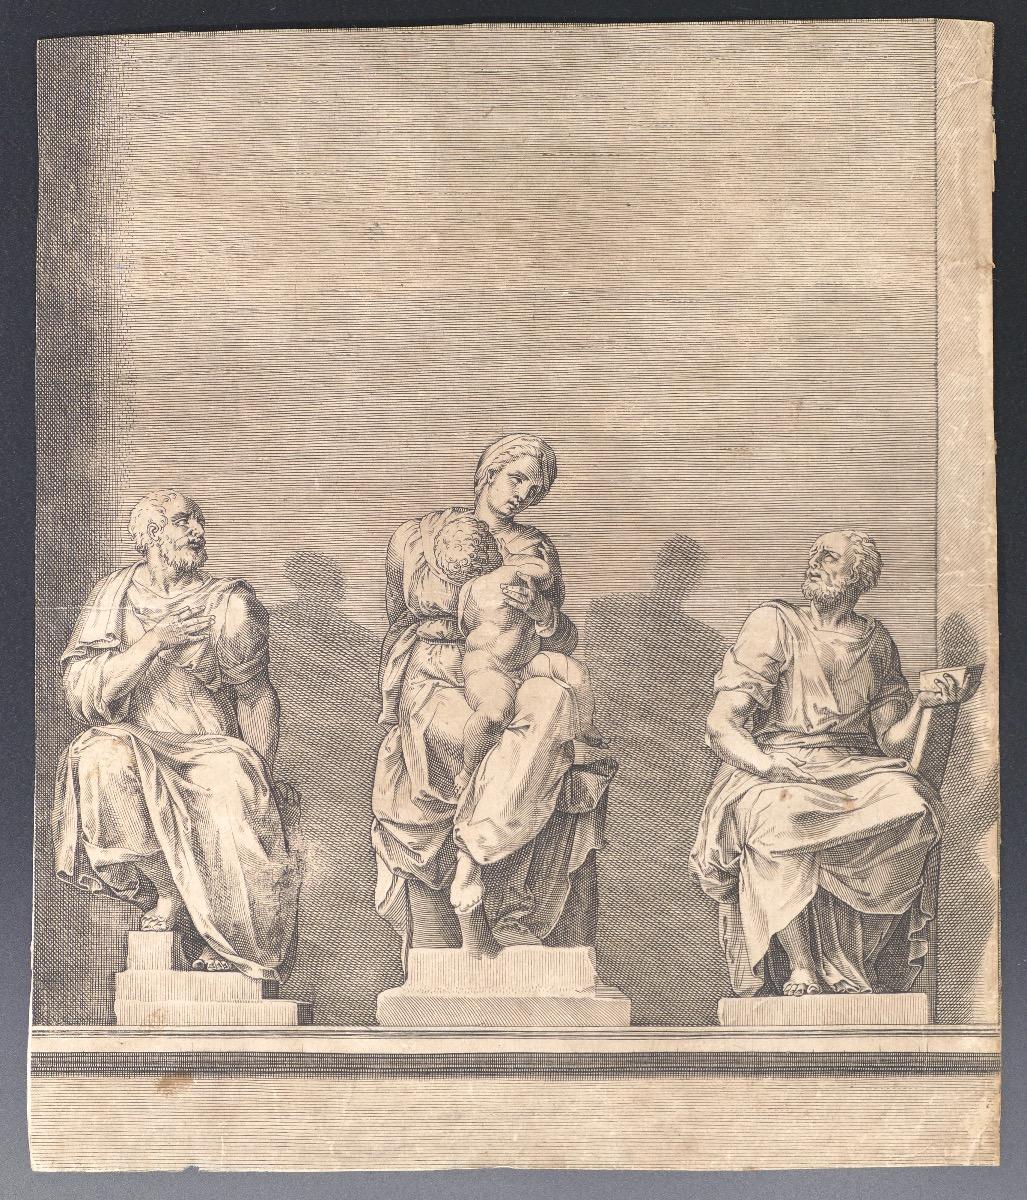 Unknown Figurative Print - Three Statues of Woman with Child In The Center -Original Etching - 19th Century